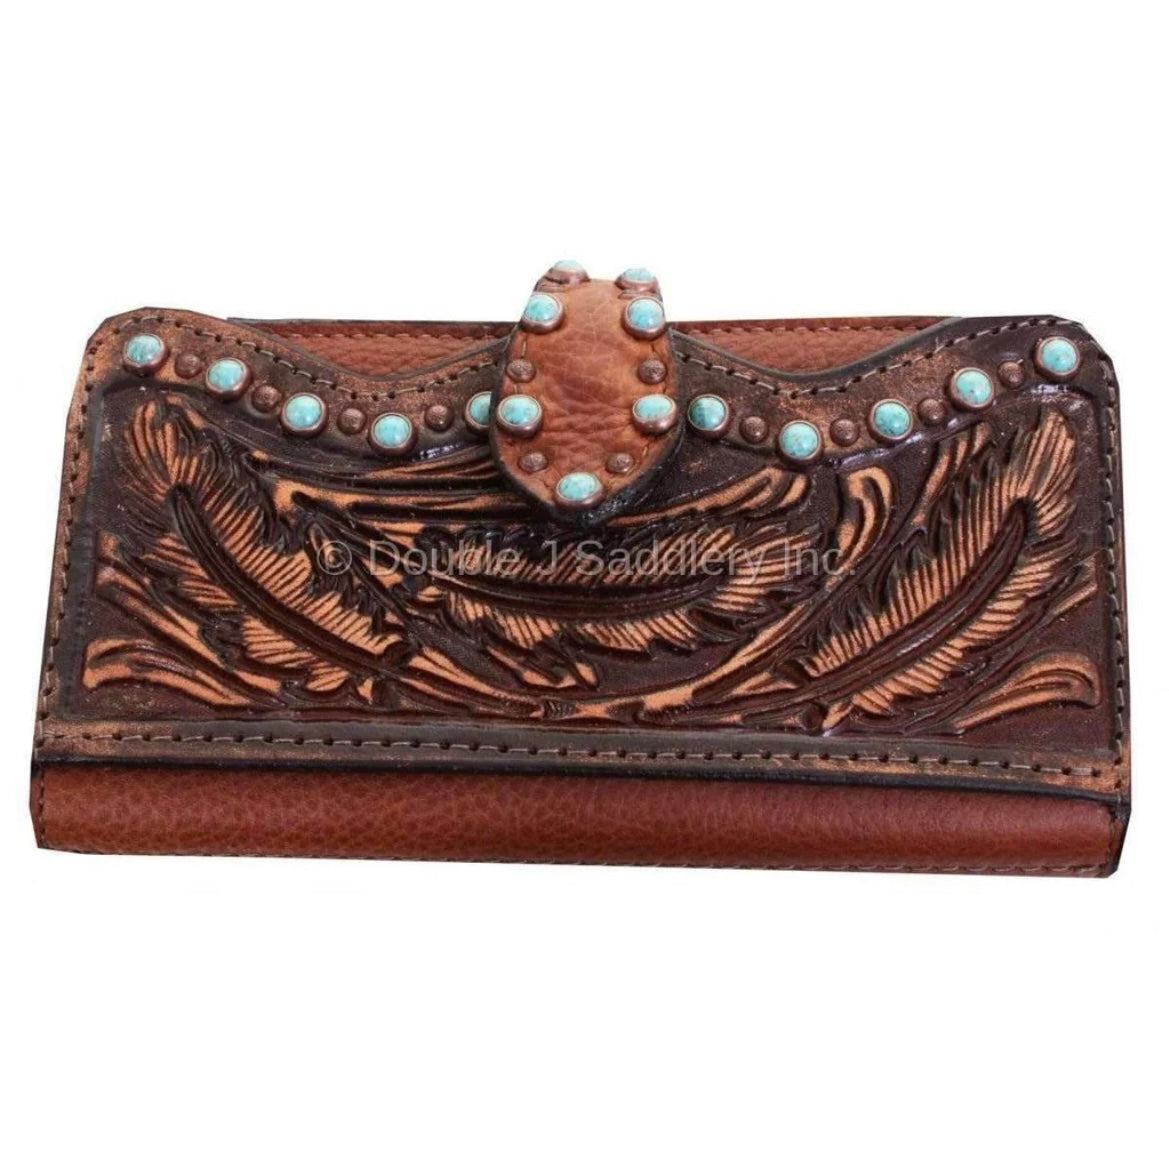 Double J Saddlery Brandy Pullup Wallet Chocolate